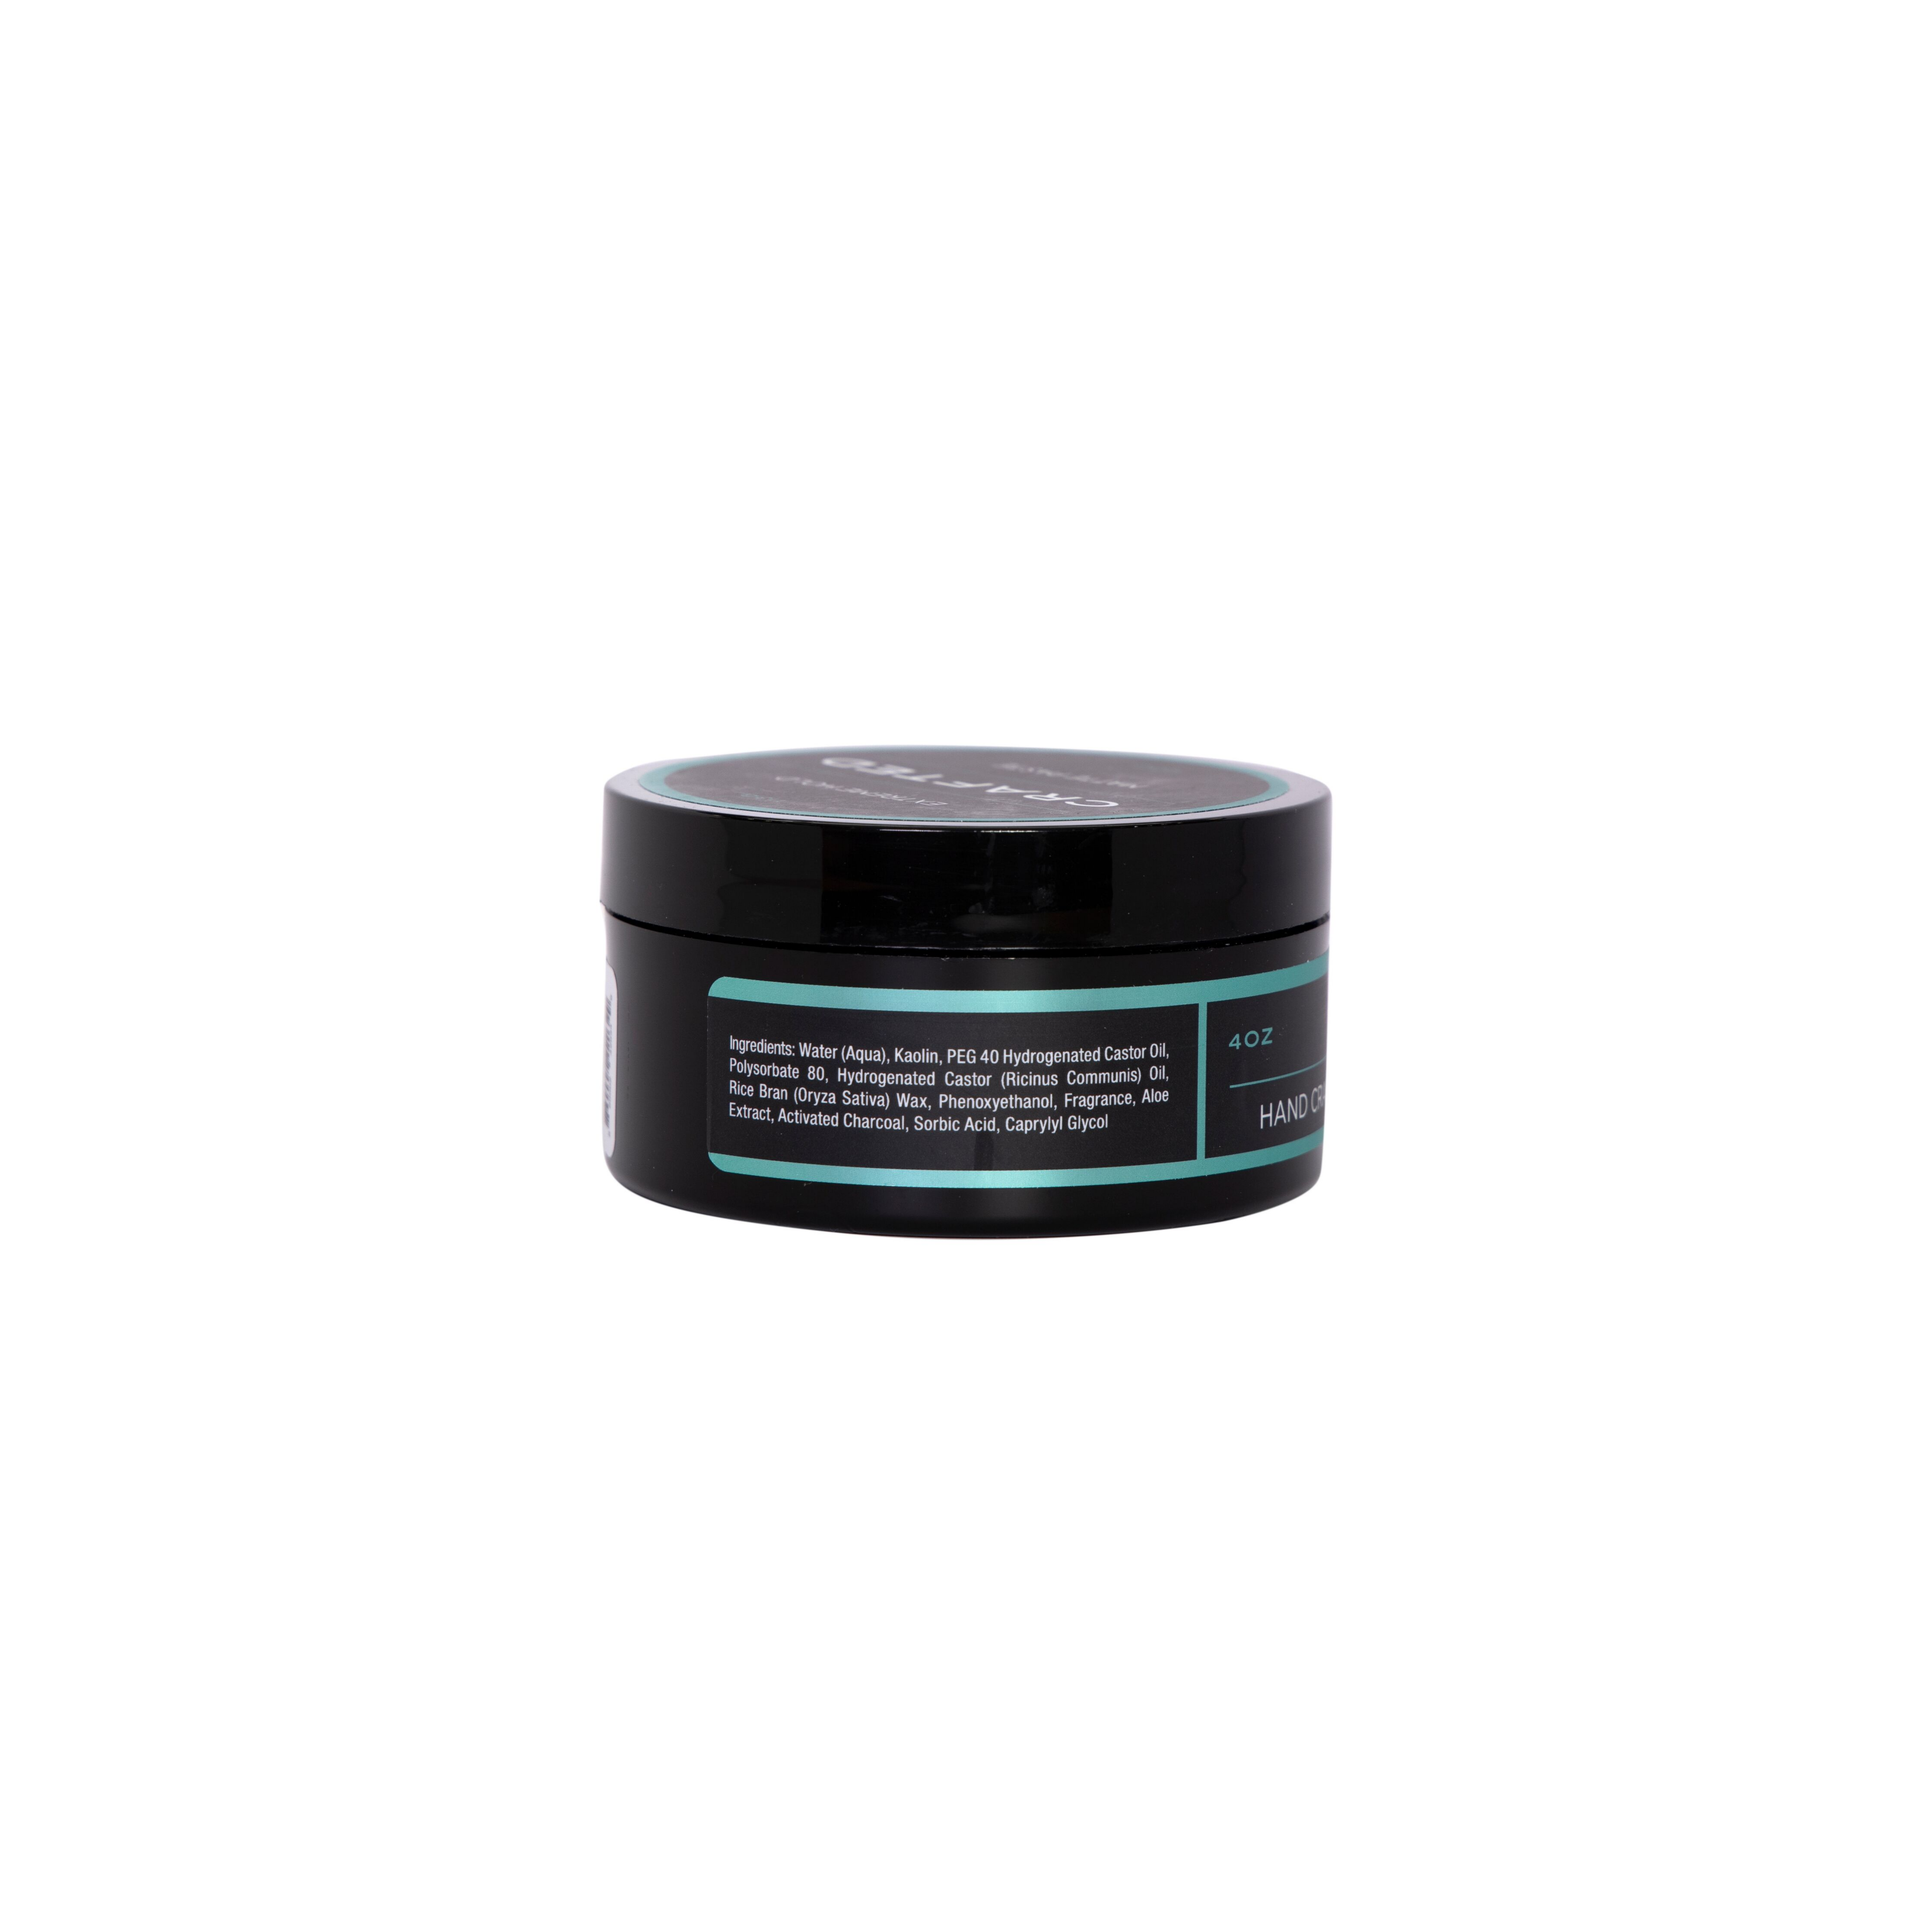 CRAFTED Extreme Hold Matte Paste 4oz - TheSalonGuy